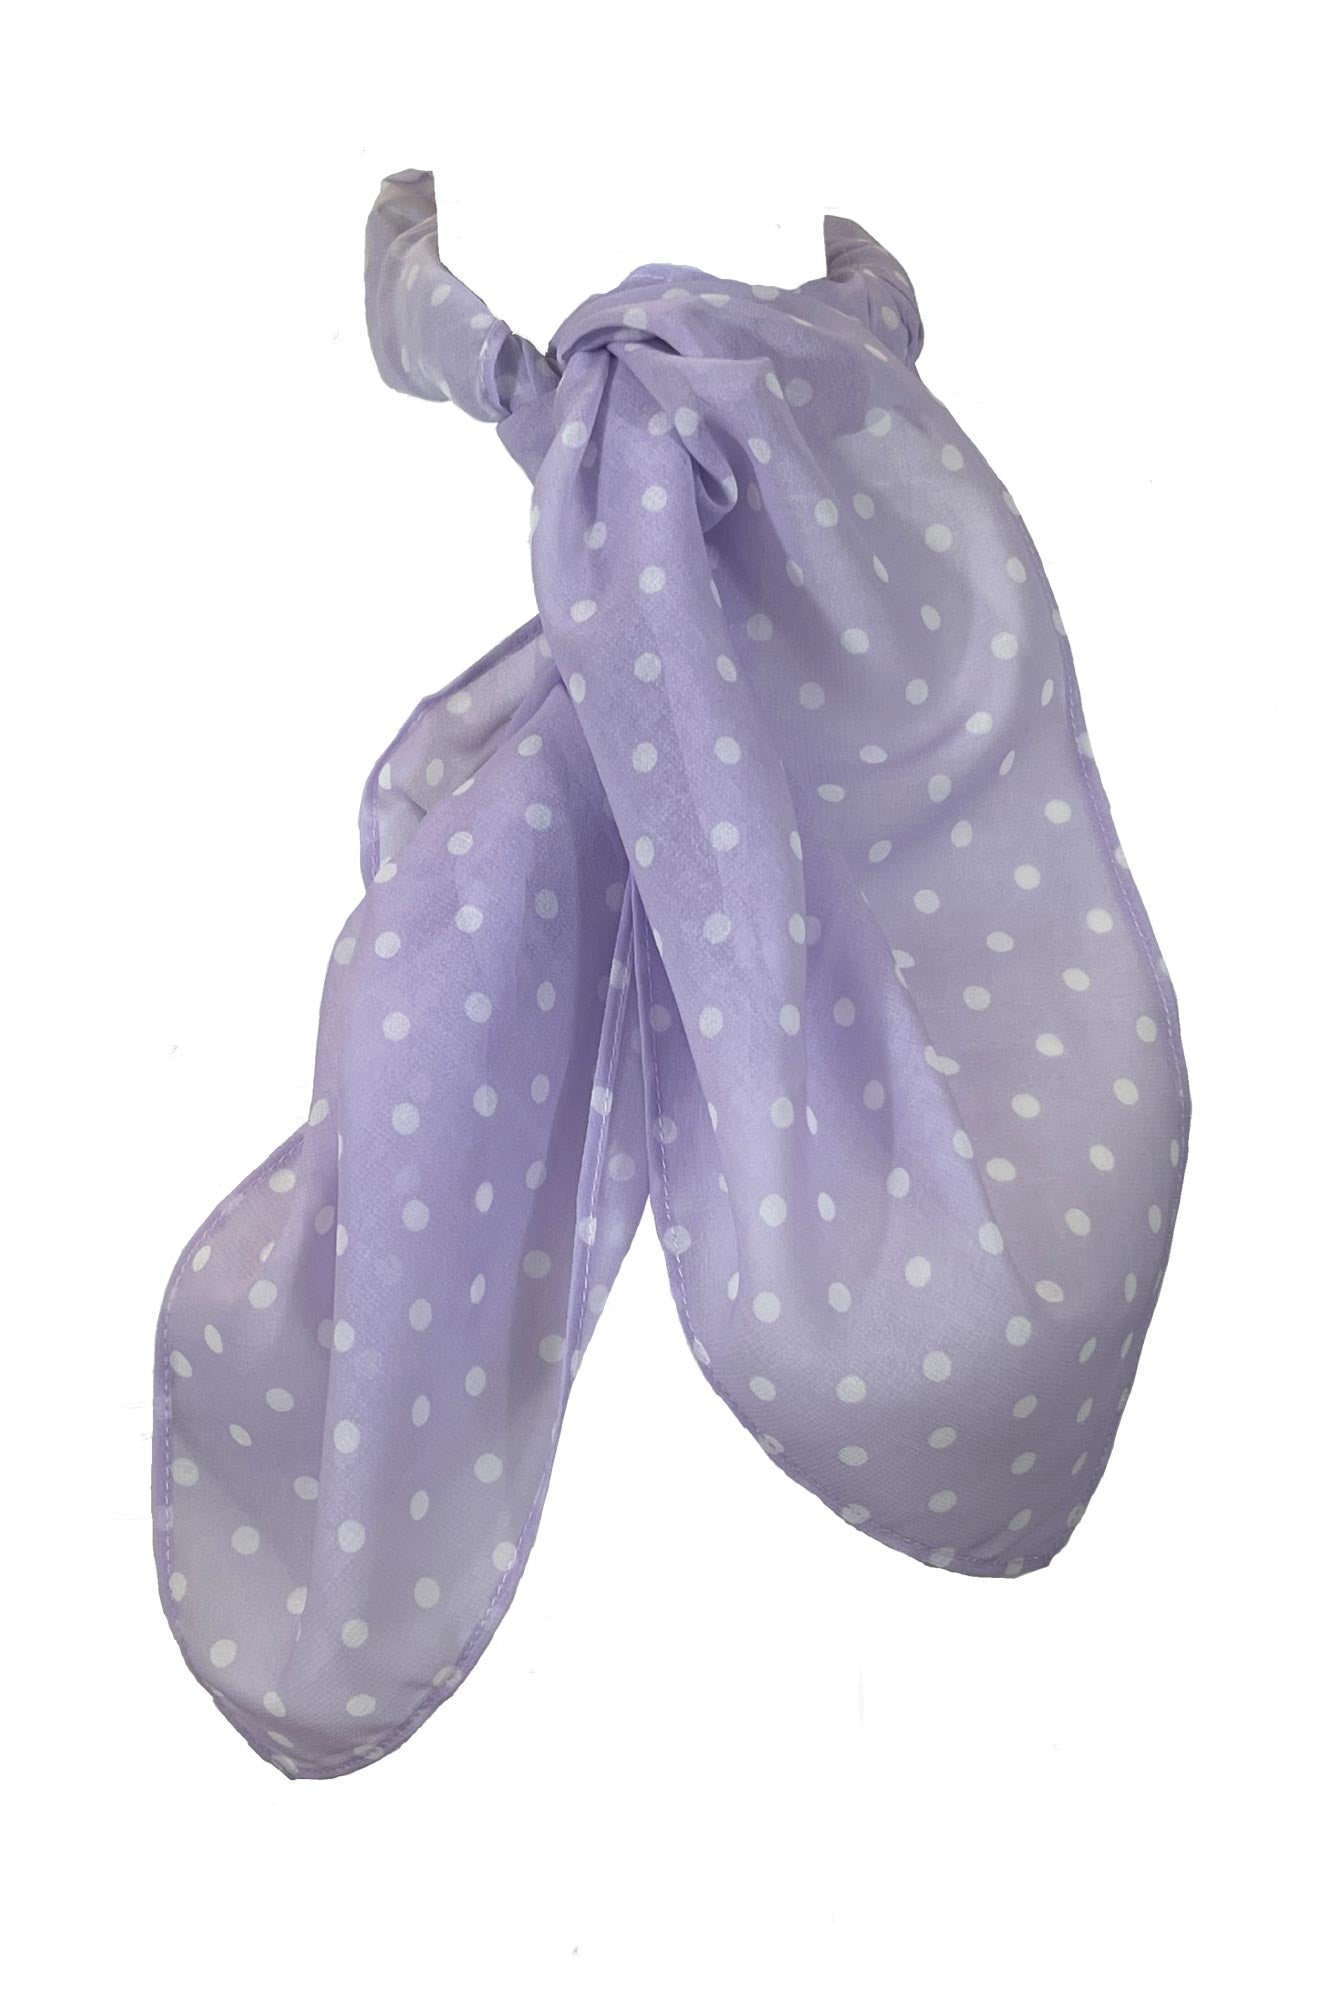 Scarf in Lilac with White Polka Dots